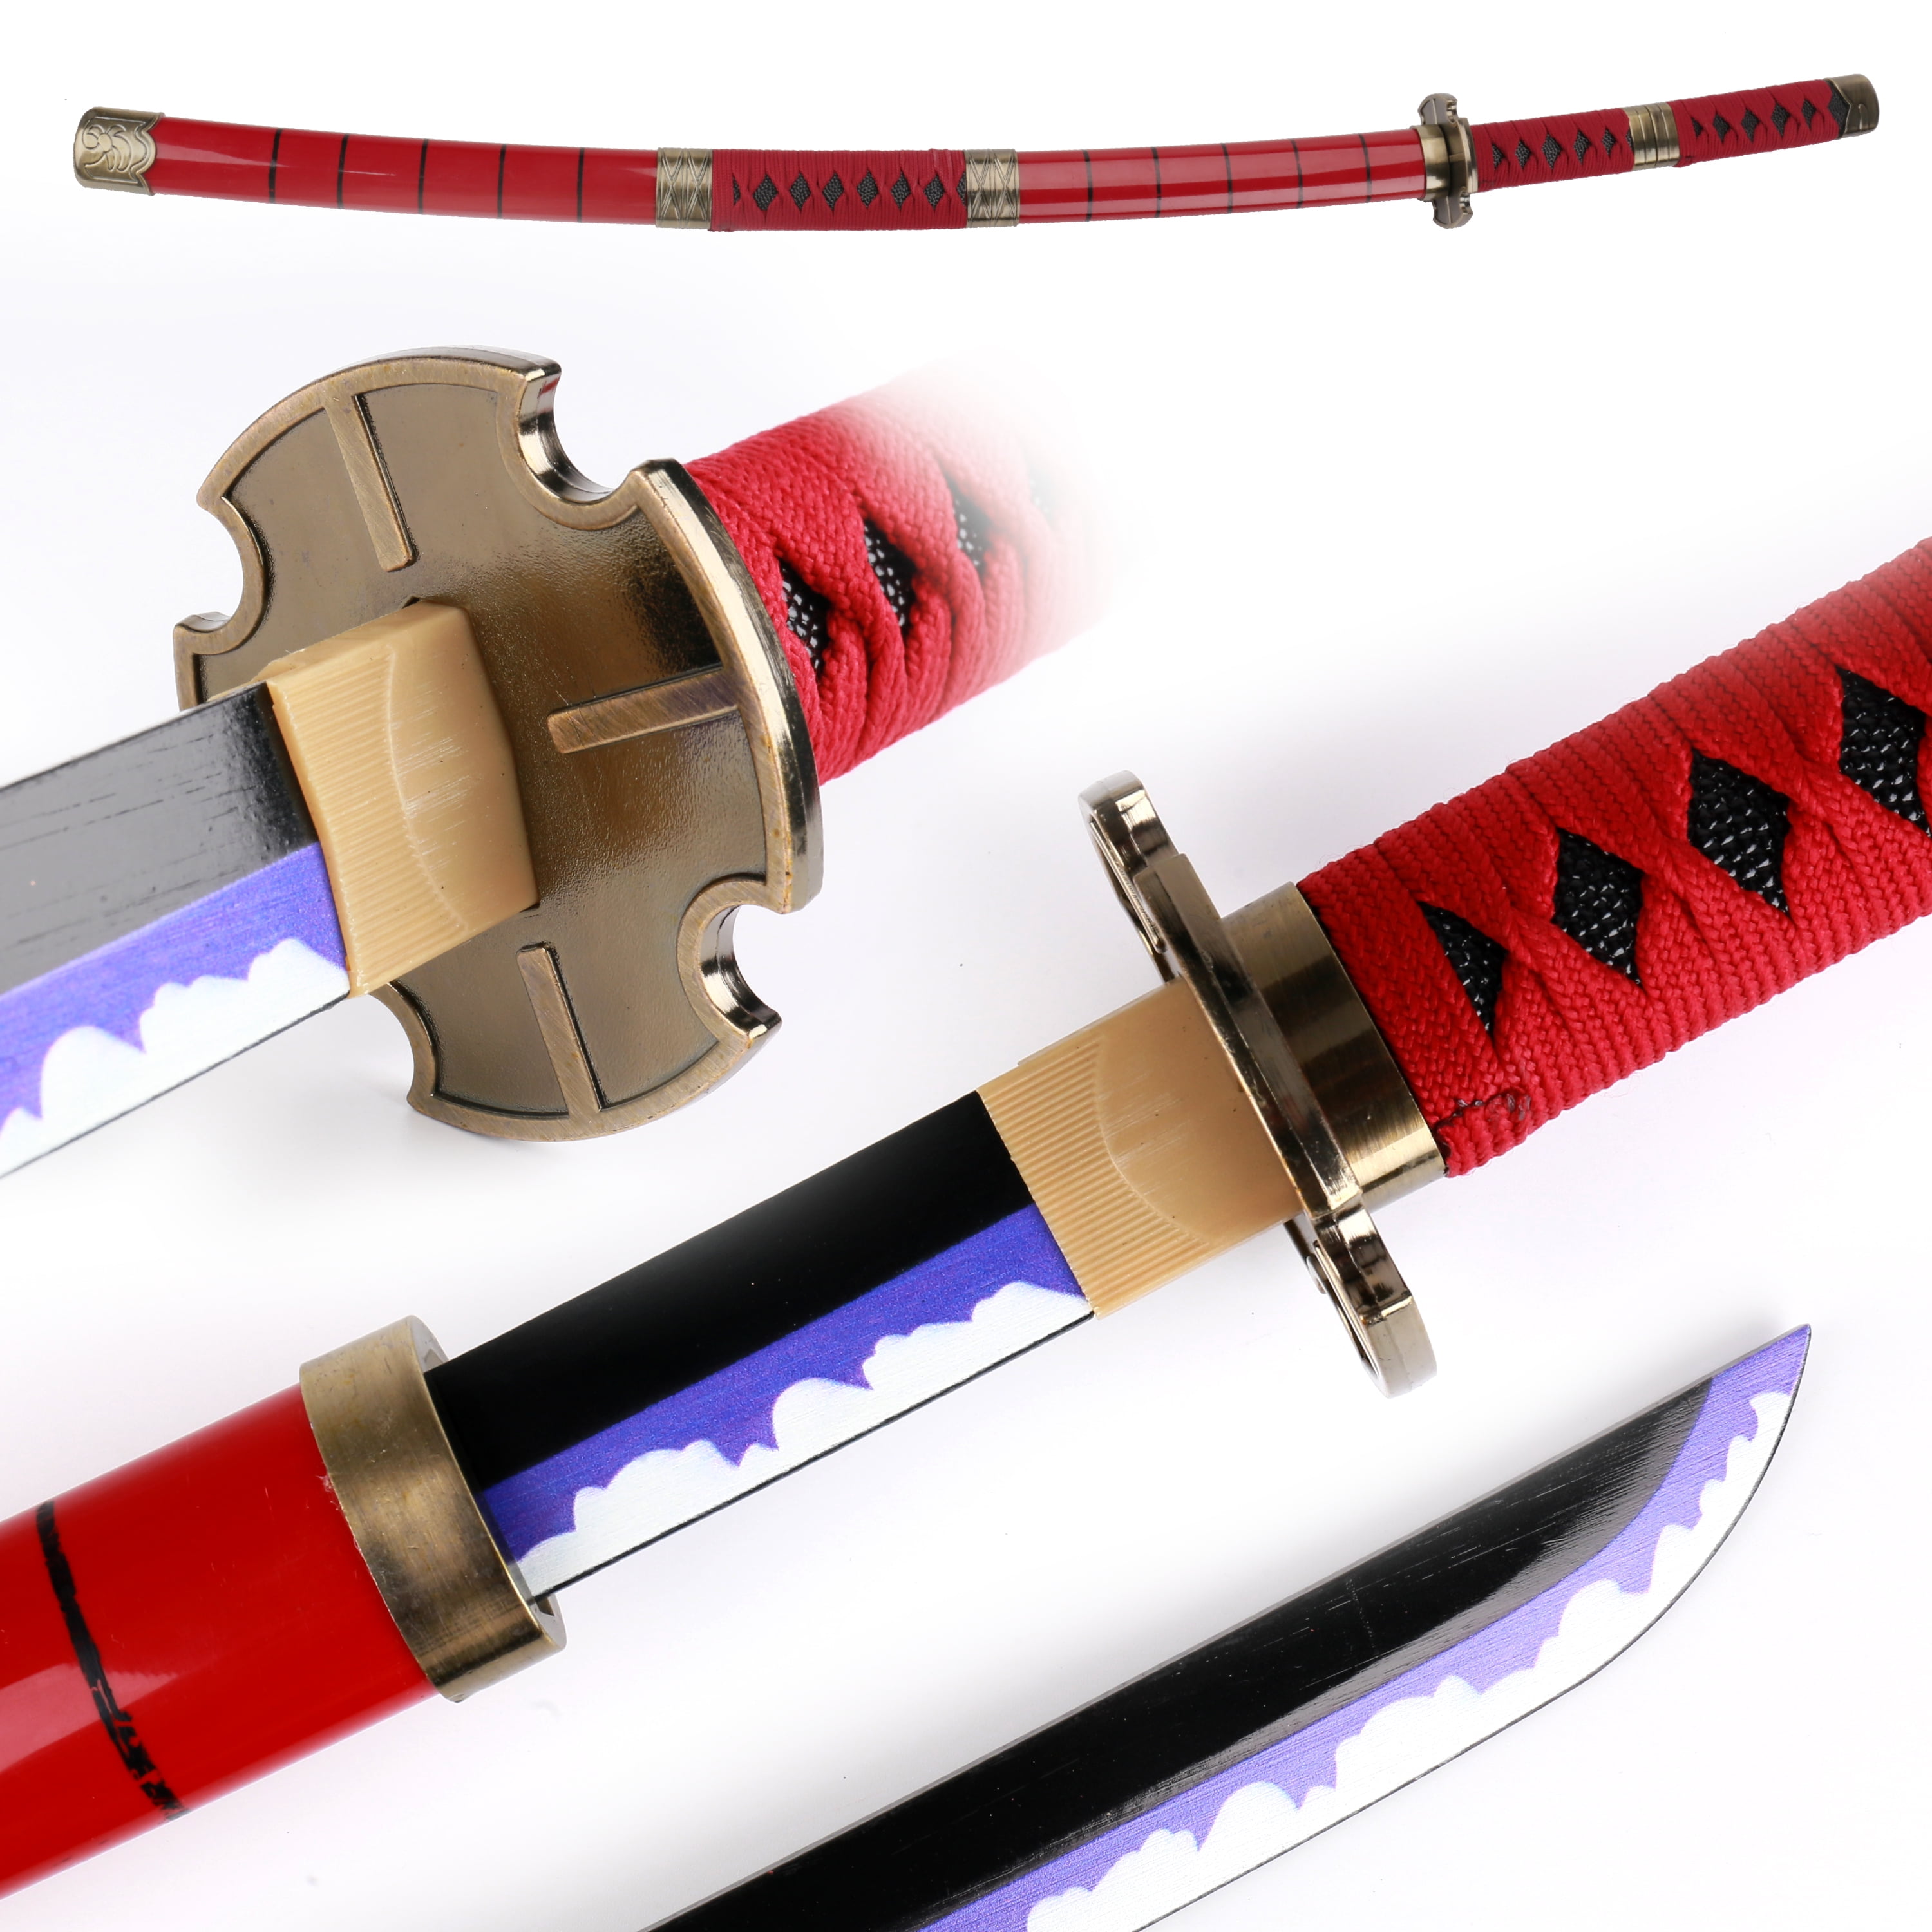 SwordNArmory on Twitter Sword design is based off a popular anime  character weapon and allows you to own an Elucidator in real life Sword  is made of 440 StainlessSteel and is equipped